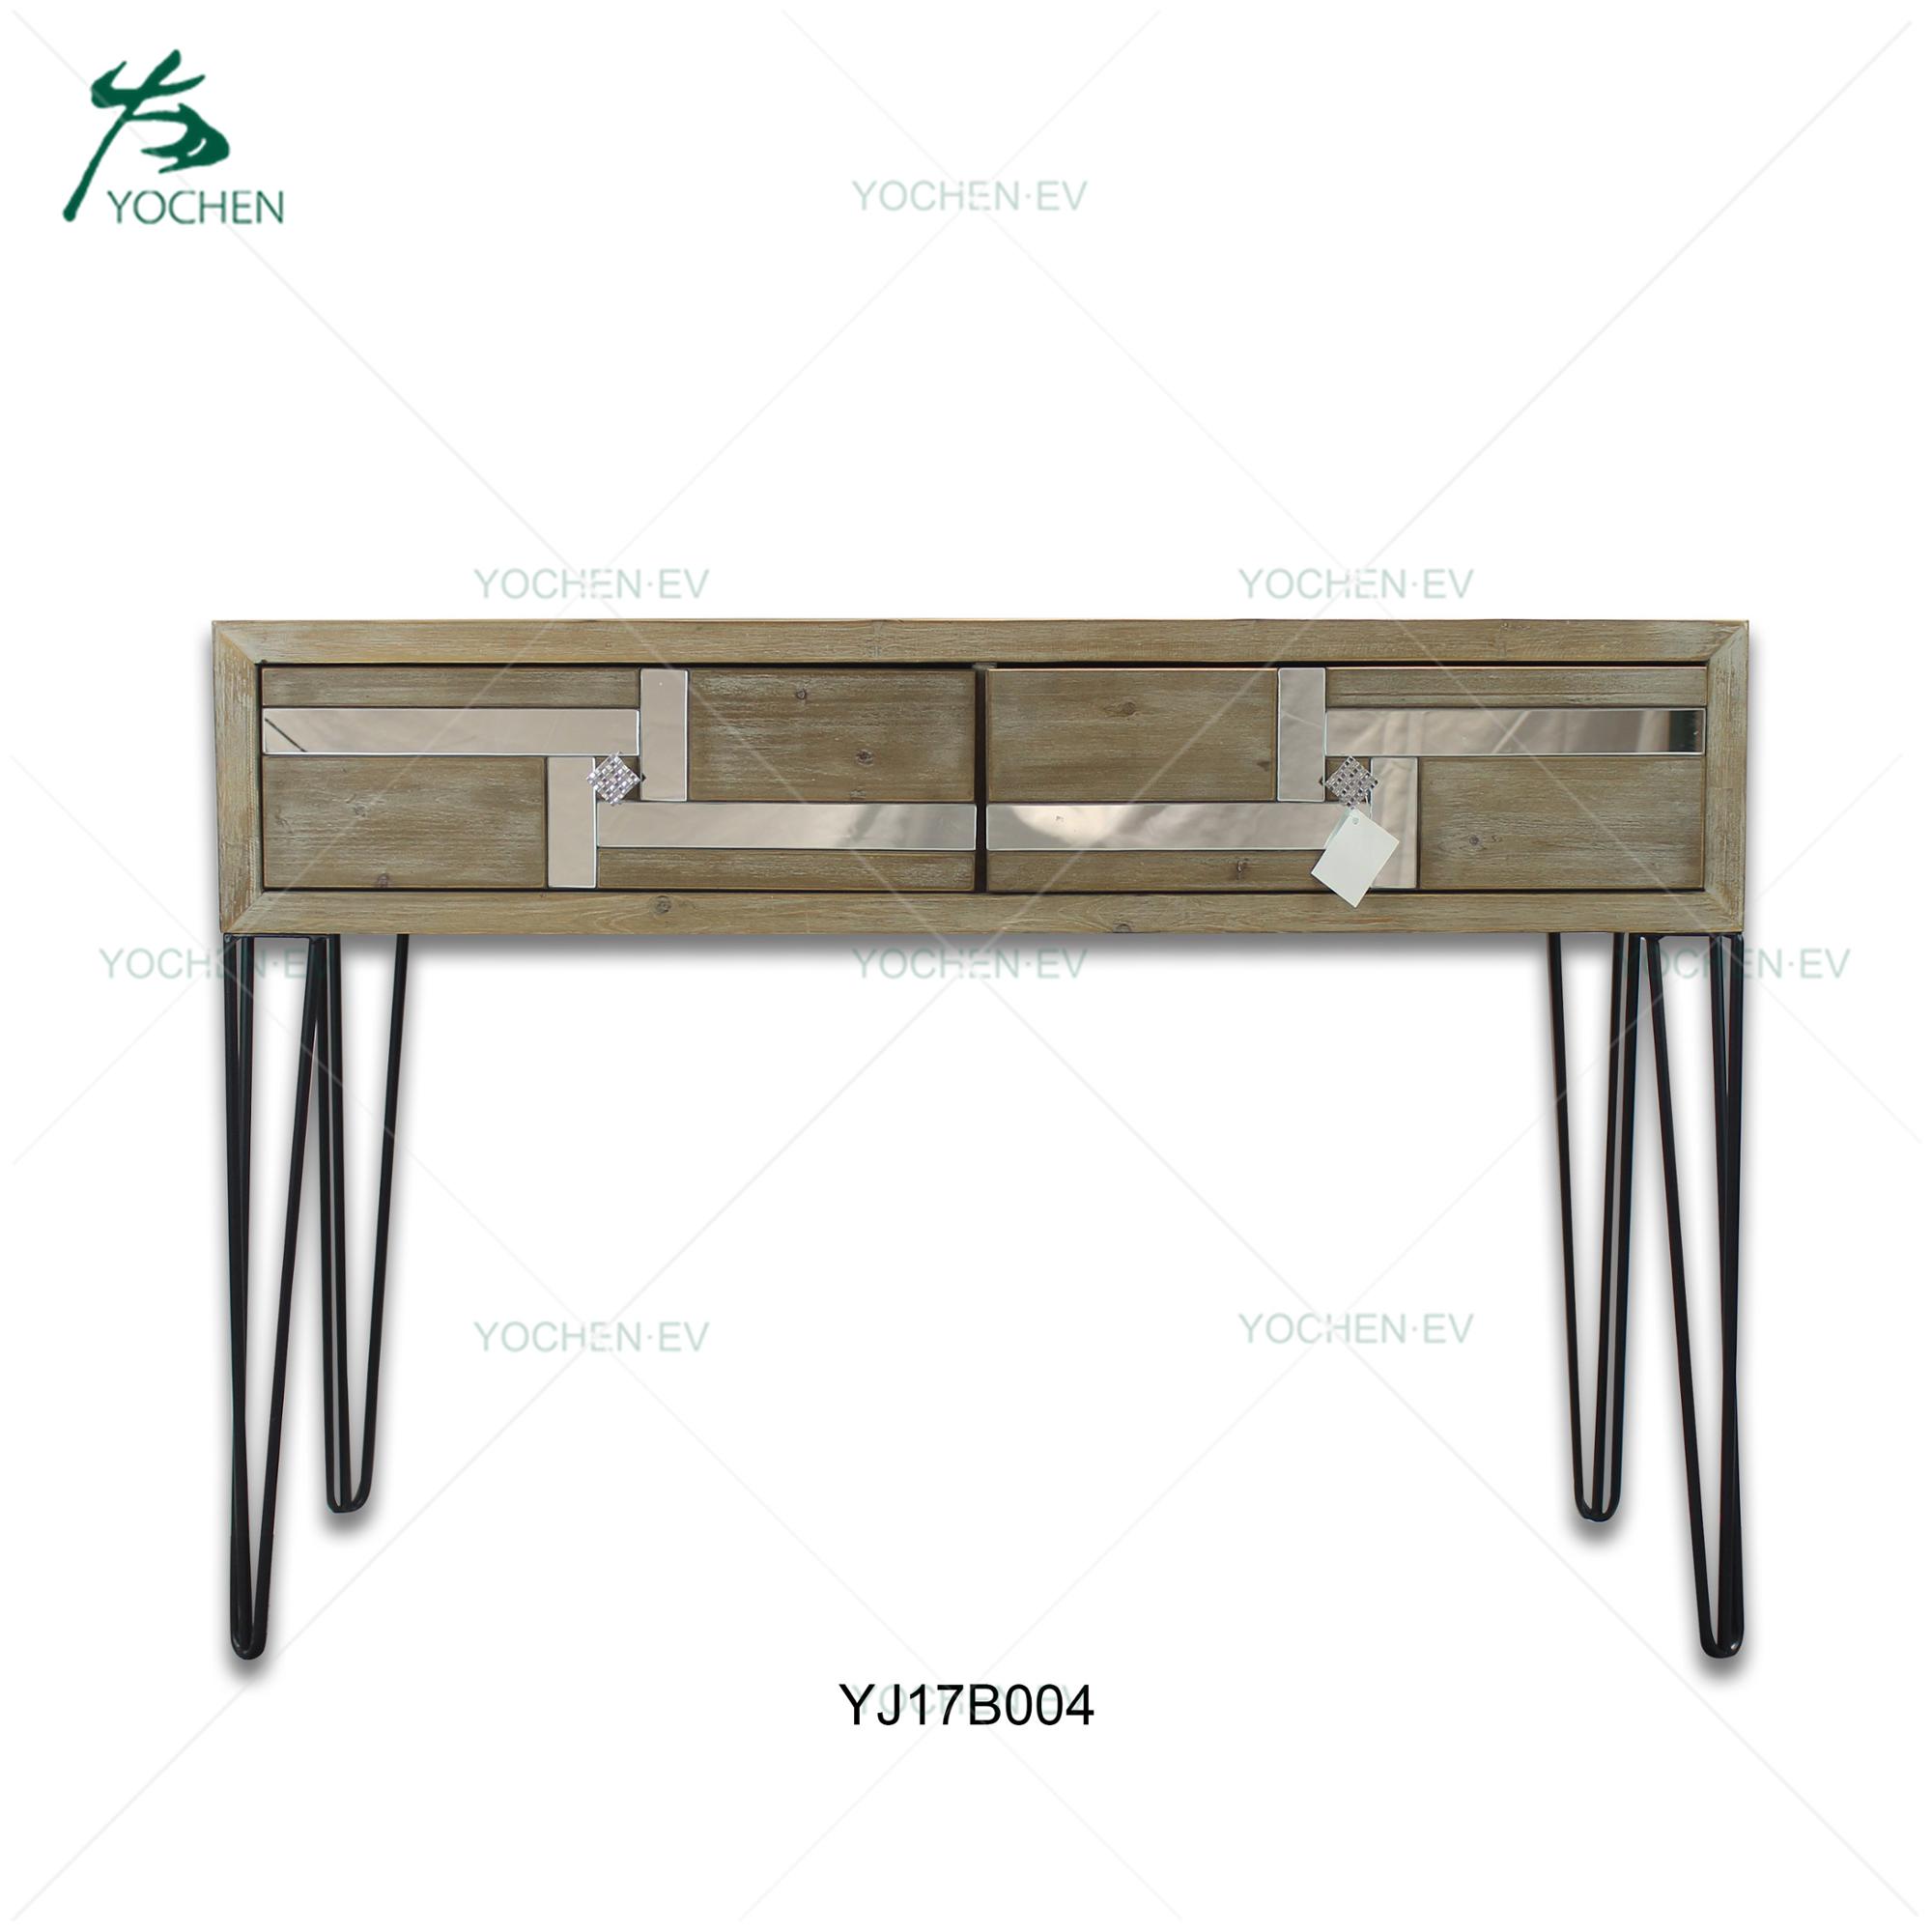 Natural wooden pattern 2 drawer console table with mirror